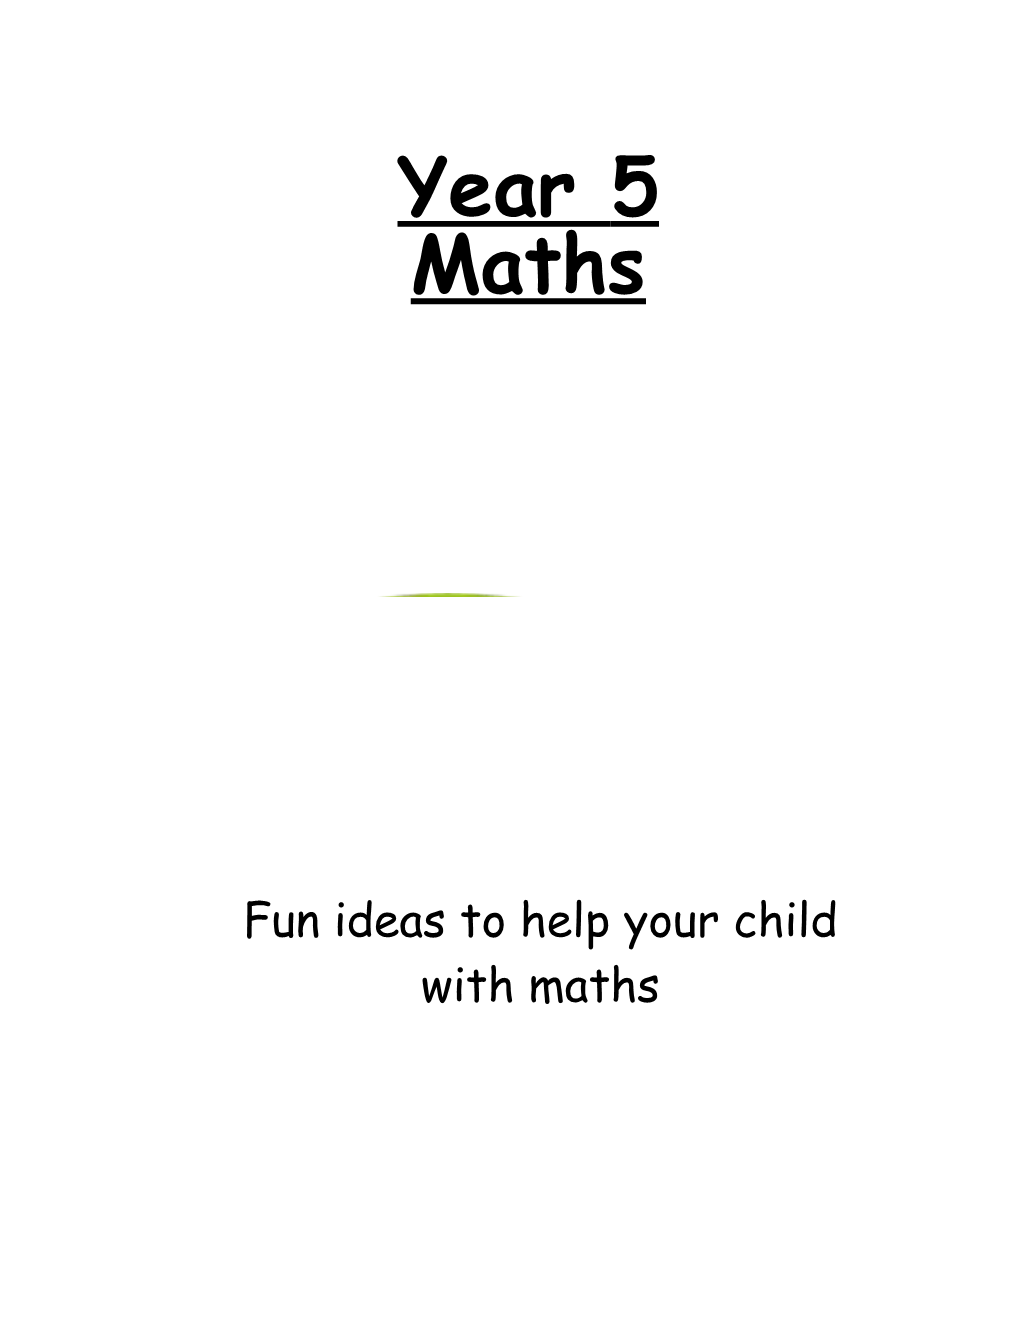 Fun Ideas to Helpyourchild with Maths